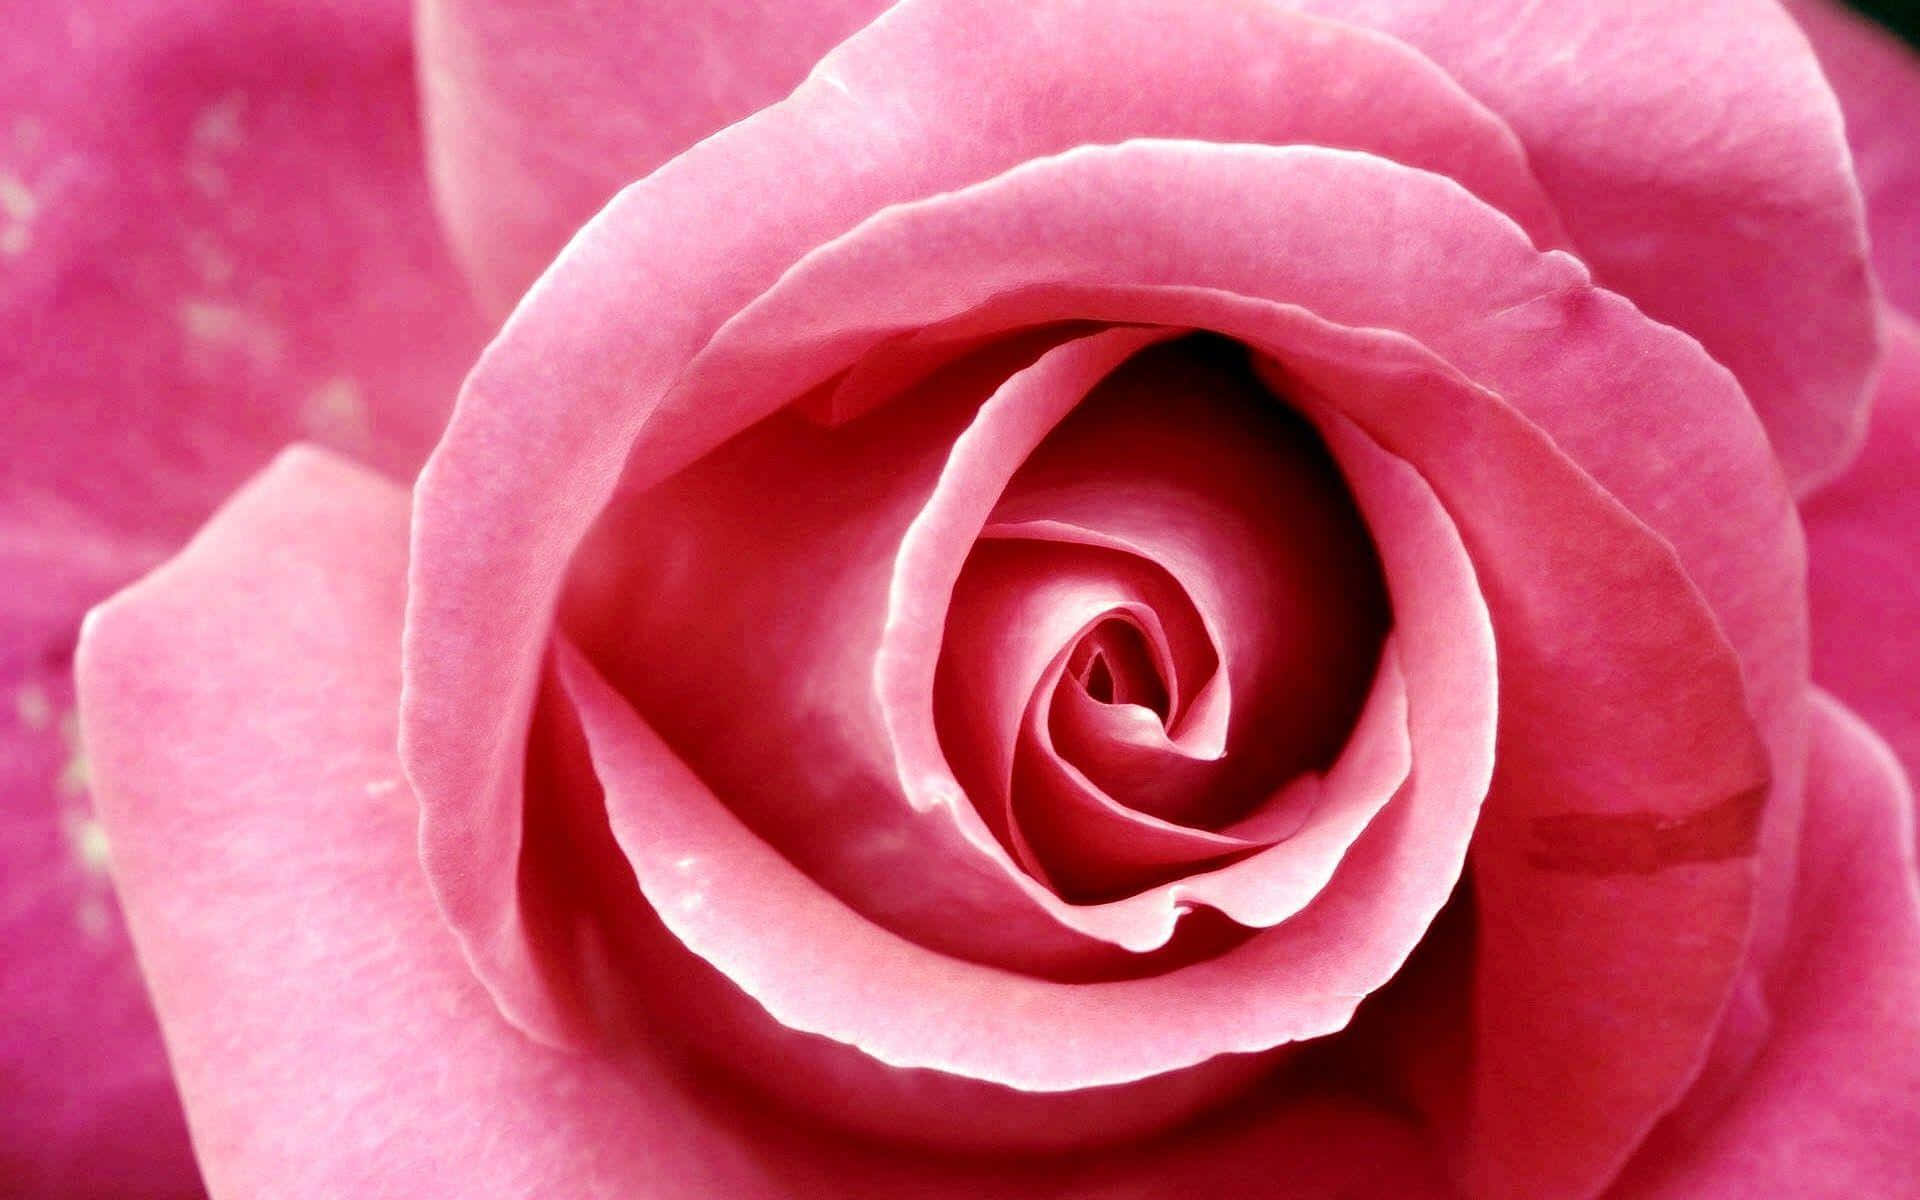 A single pink rose against a white background